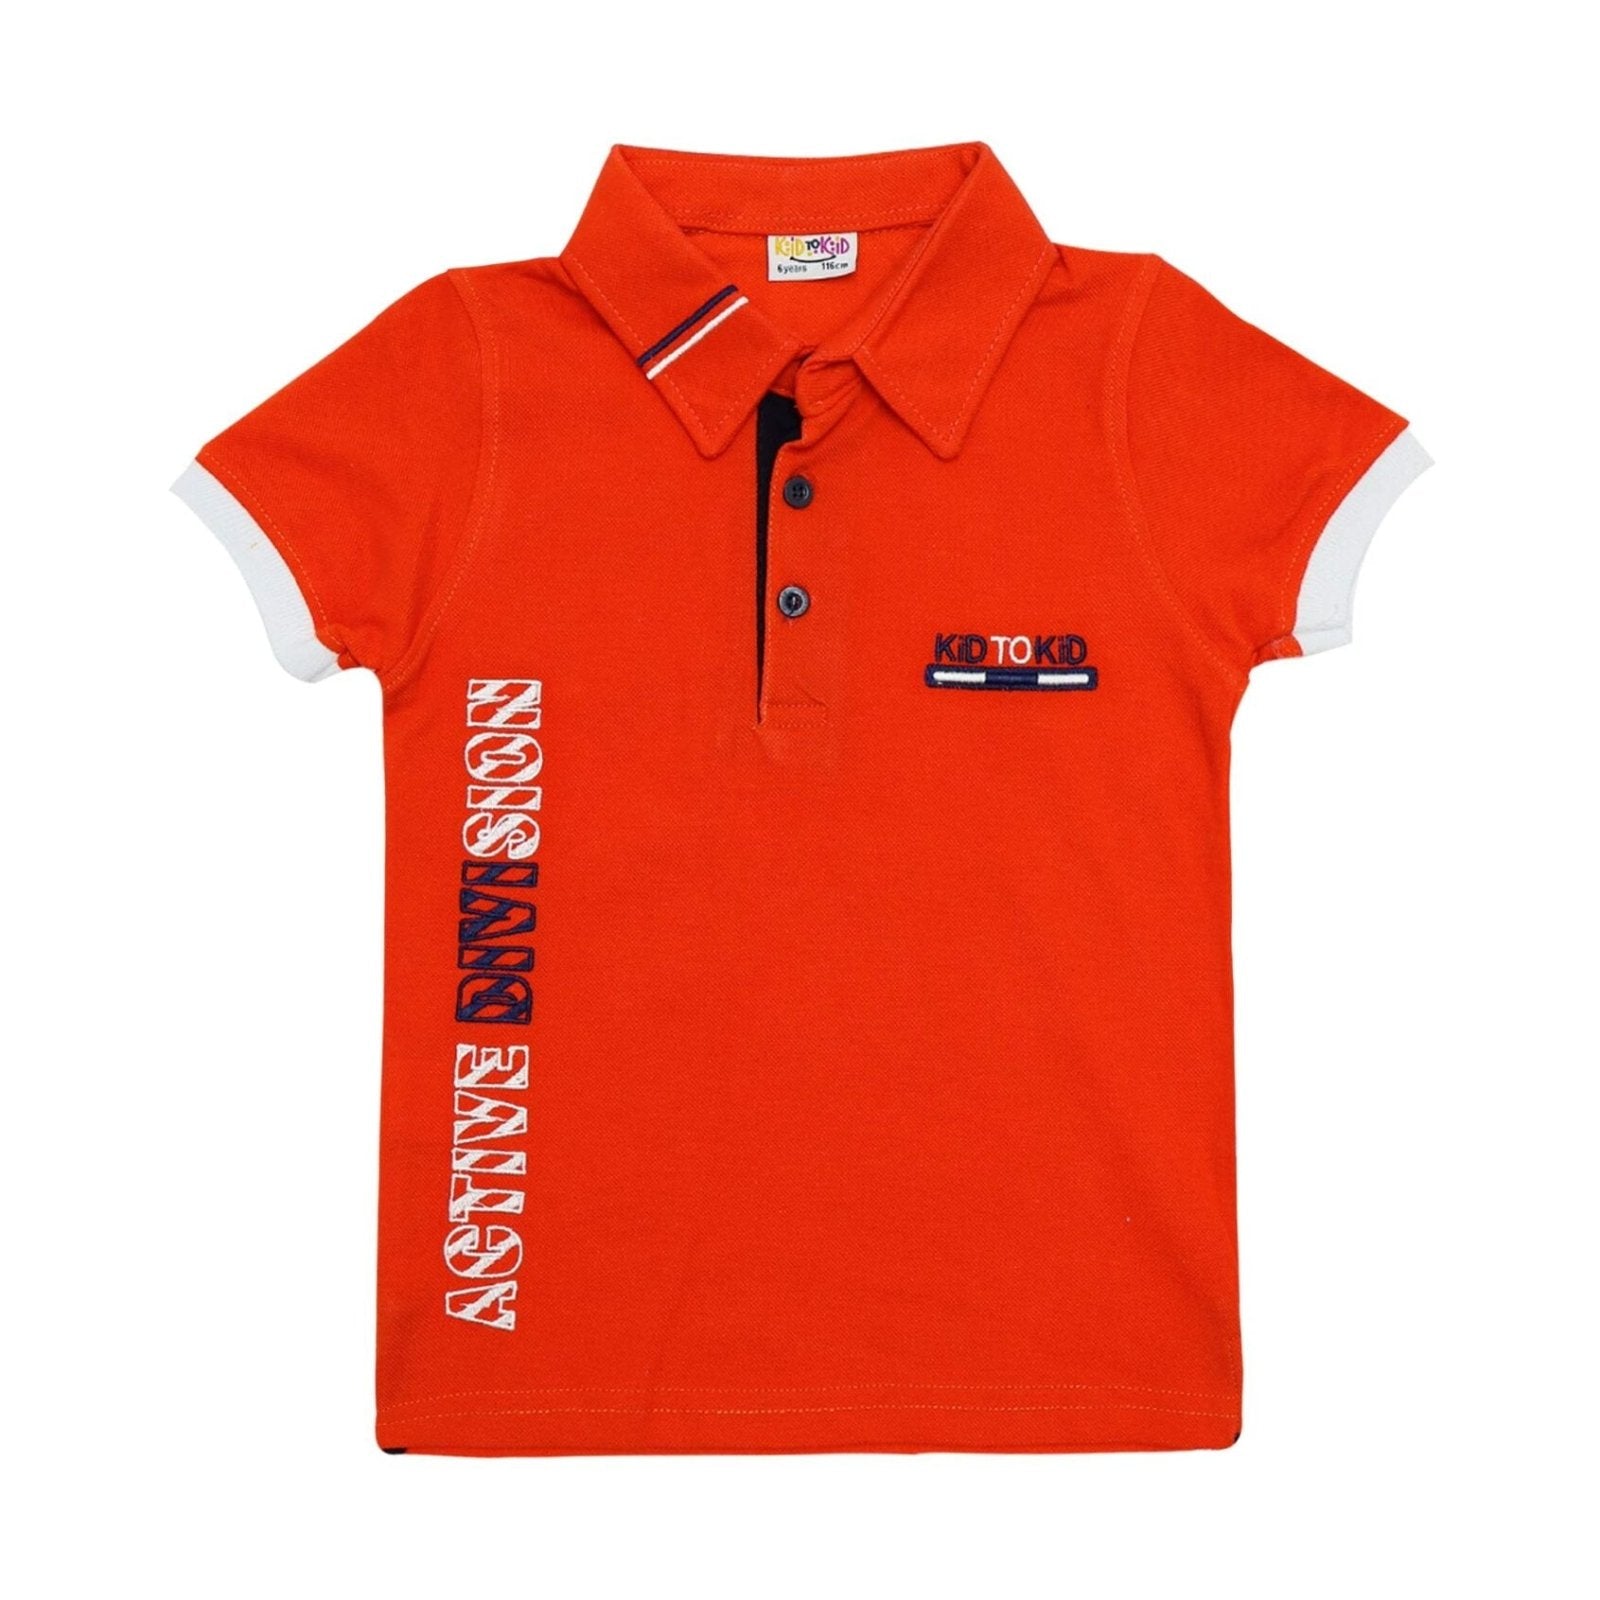 Boys T-Shirt Orangered Color by Made in Turkey